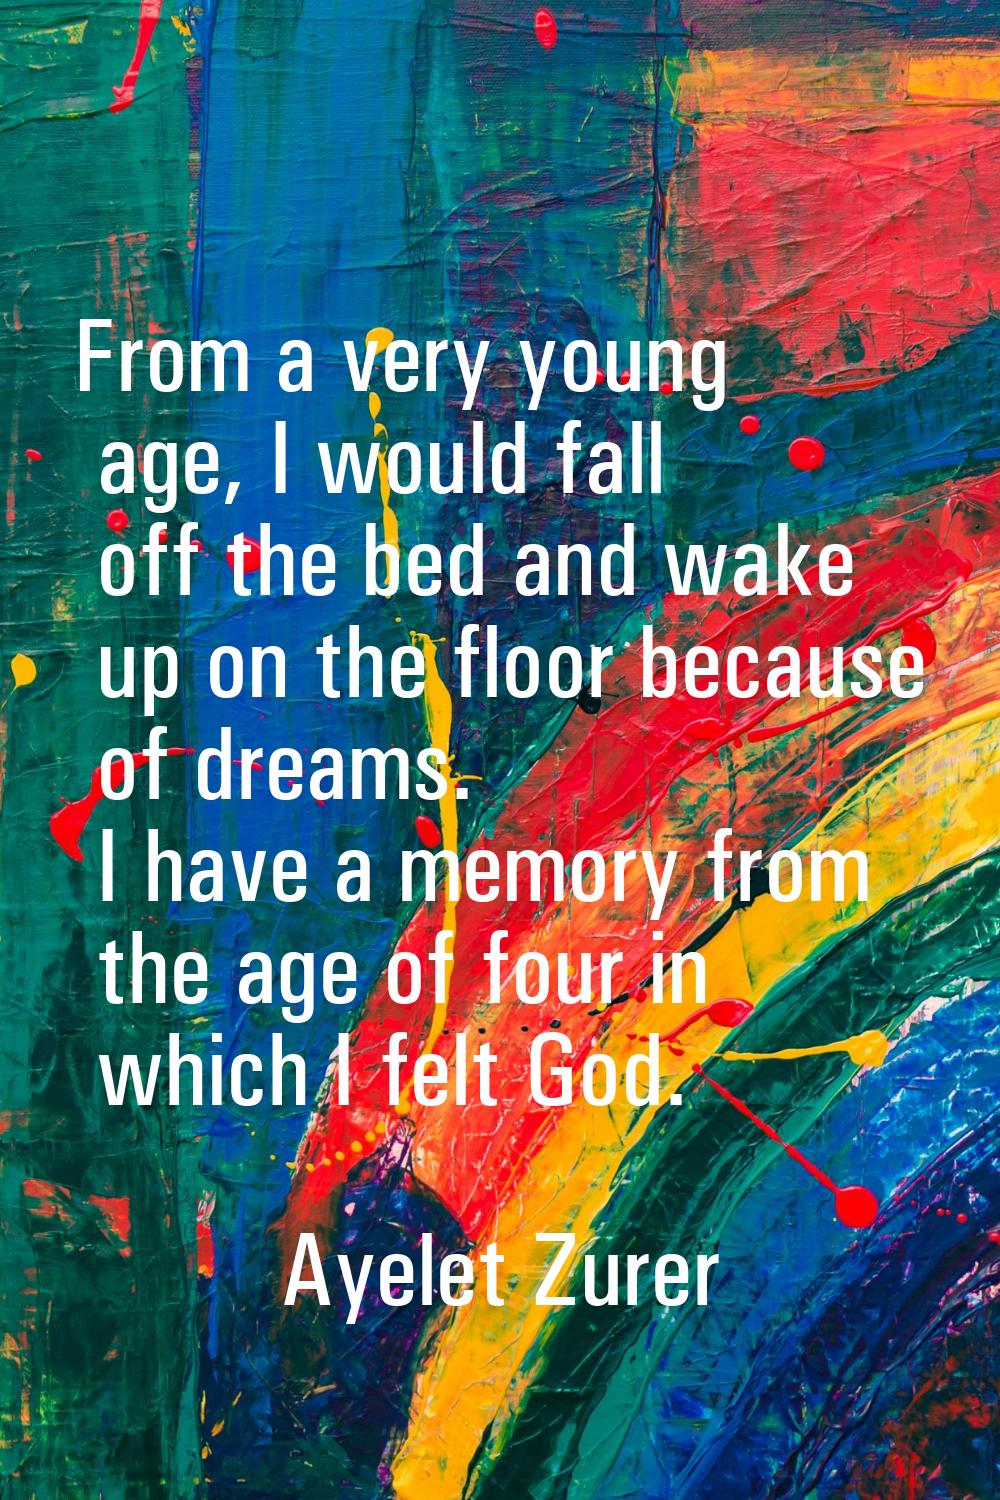 From a very young age, I would fall off the bed and wake up on the floor because of dreams. I have 